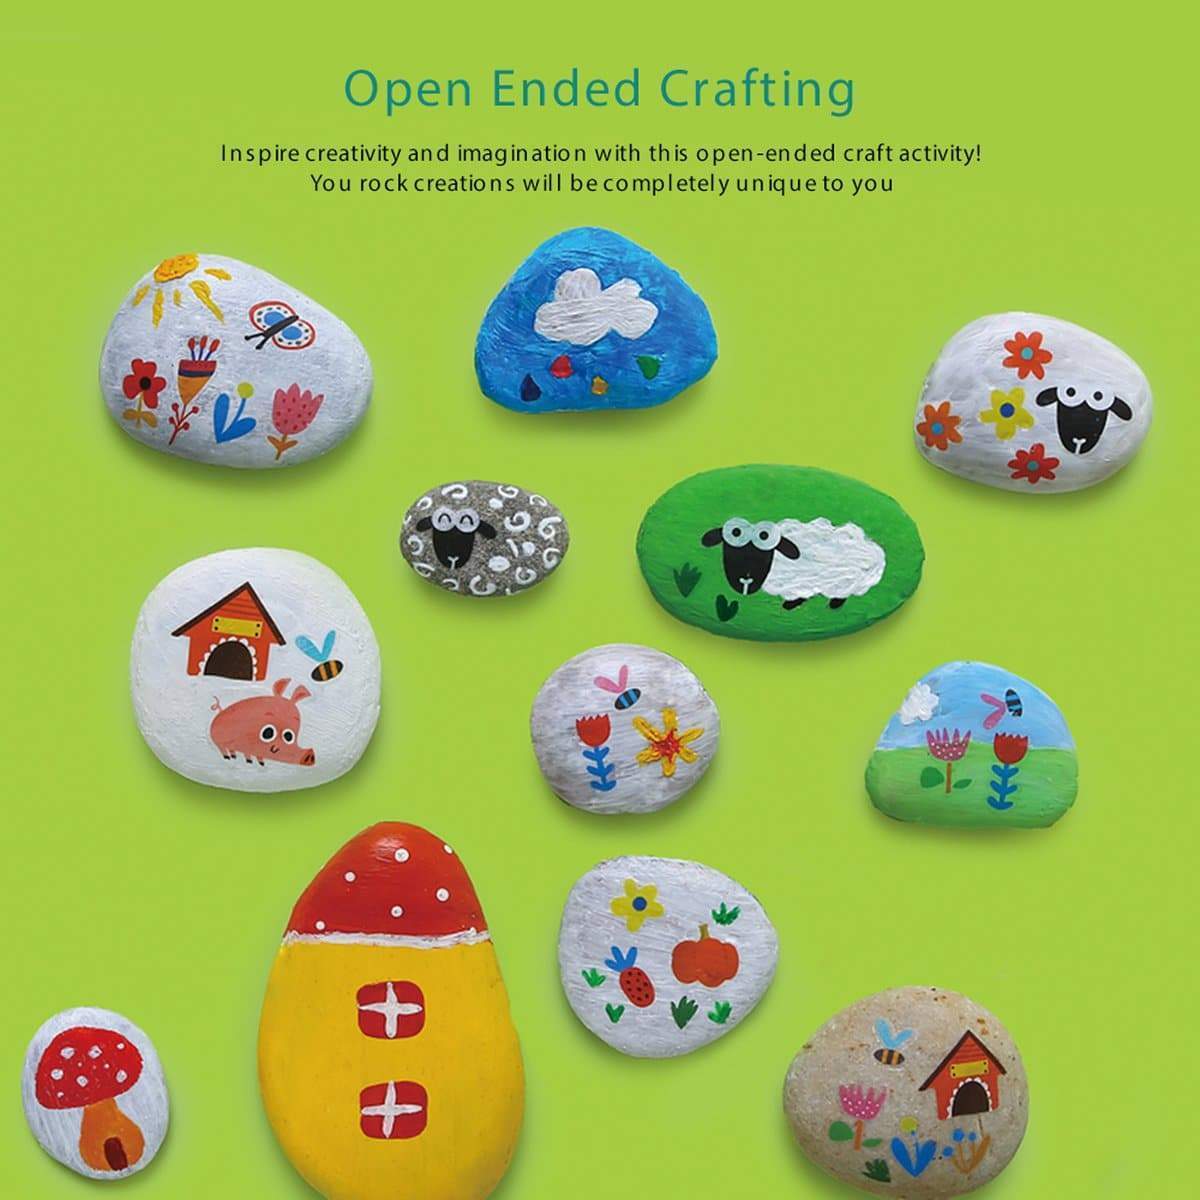 toys for infant Rock Painting